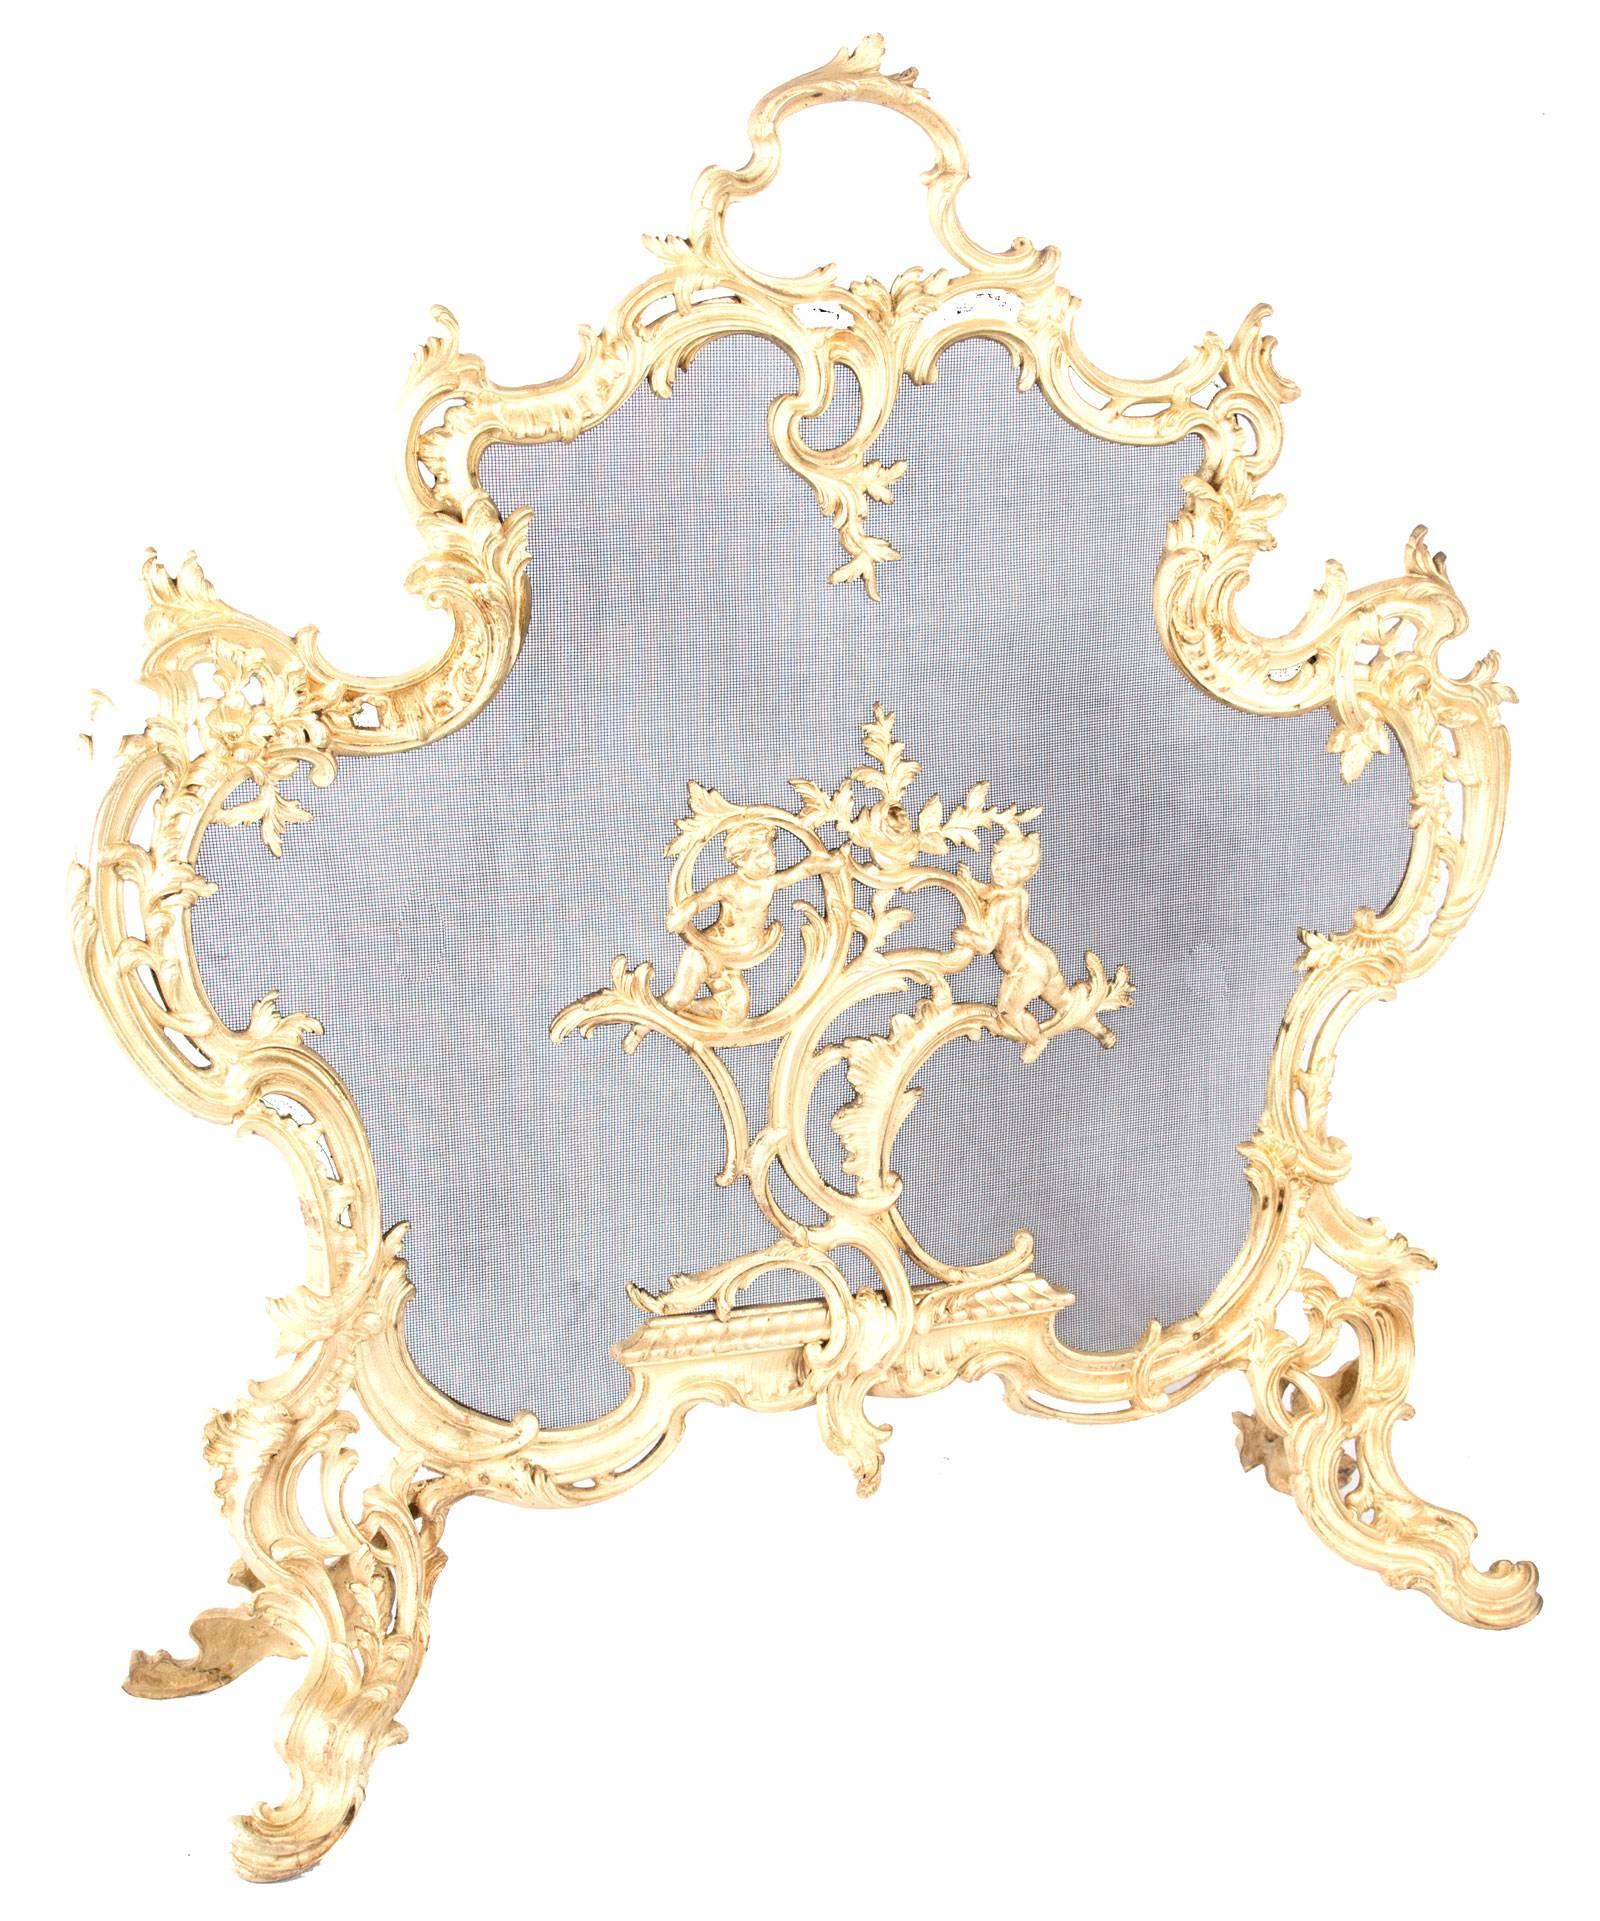 A French gilt-brass Rococo-style fireplace screen, the ornate frame with scrolling foliage and filigree designs and a pair of cherubs on the screen, raised on scrolled and pierced legs.